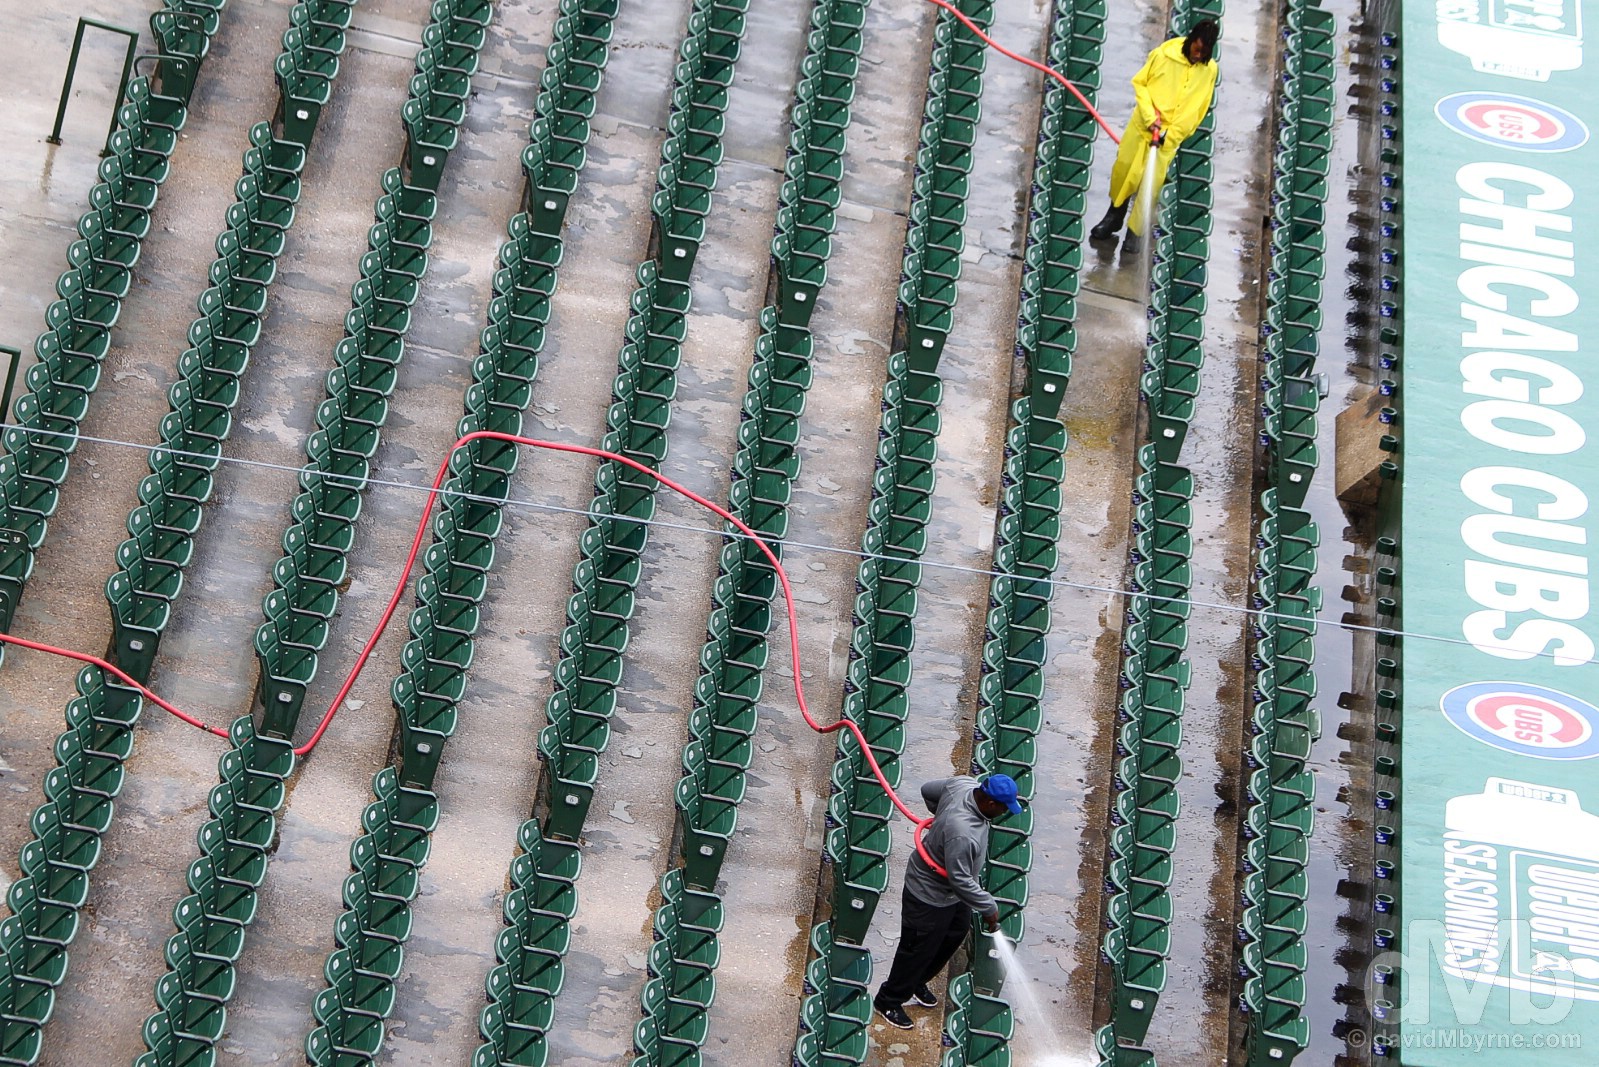 Maintenance in Wrigley Field, the home of the Chicago Cubs. Wrigleyville, Chicago, Illinois, USA. October 1, 2016.